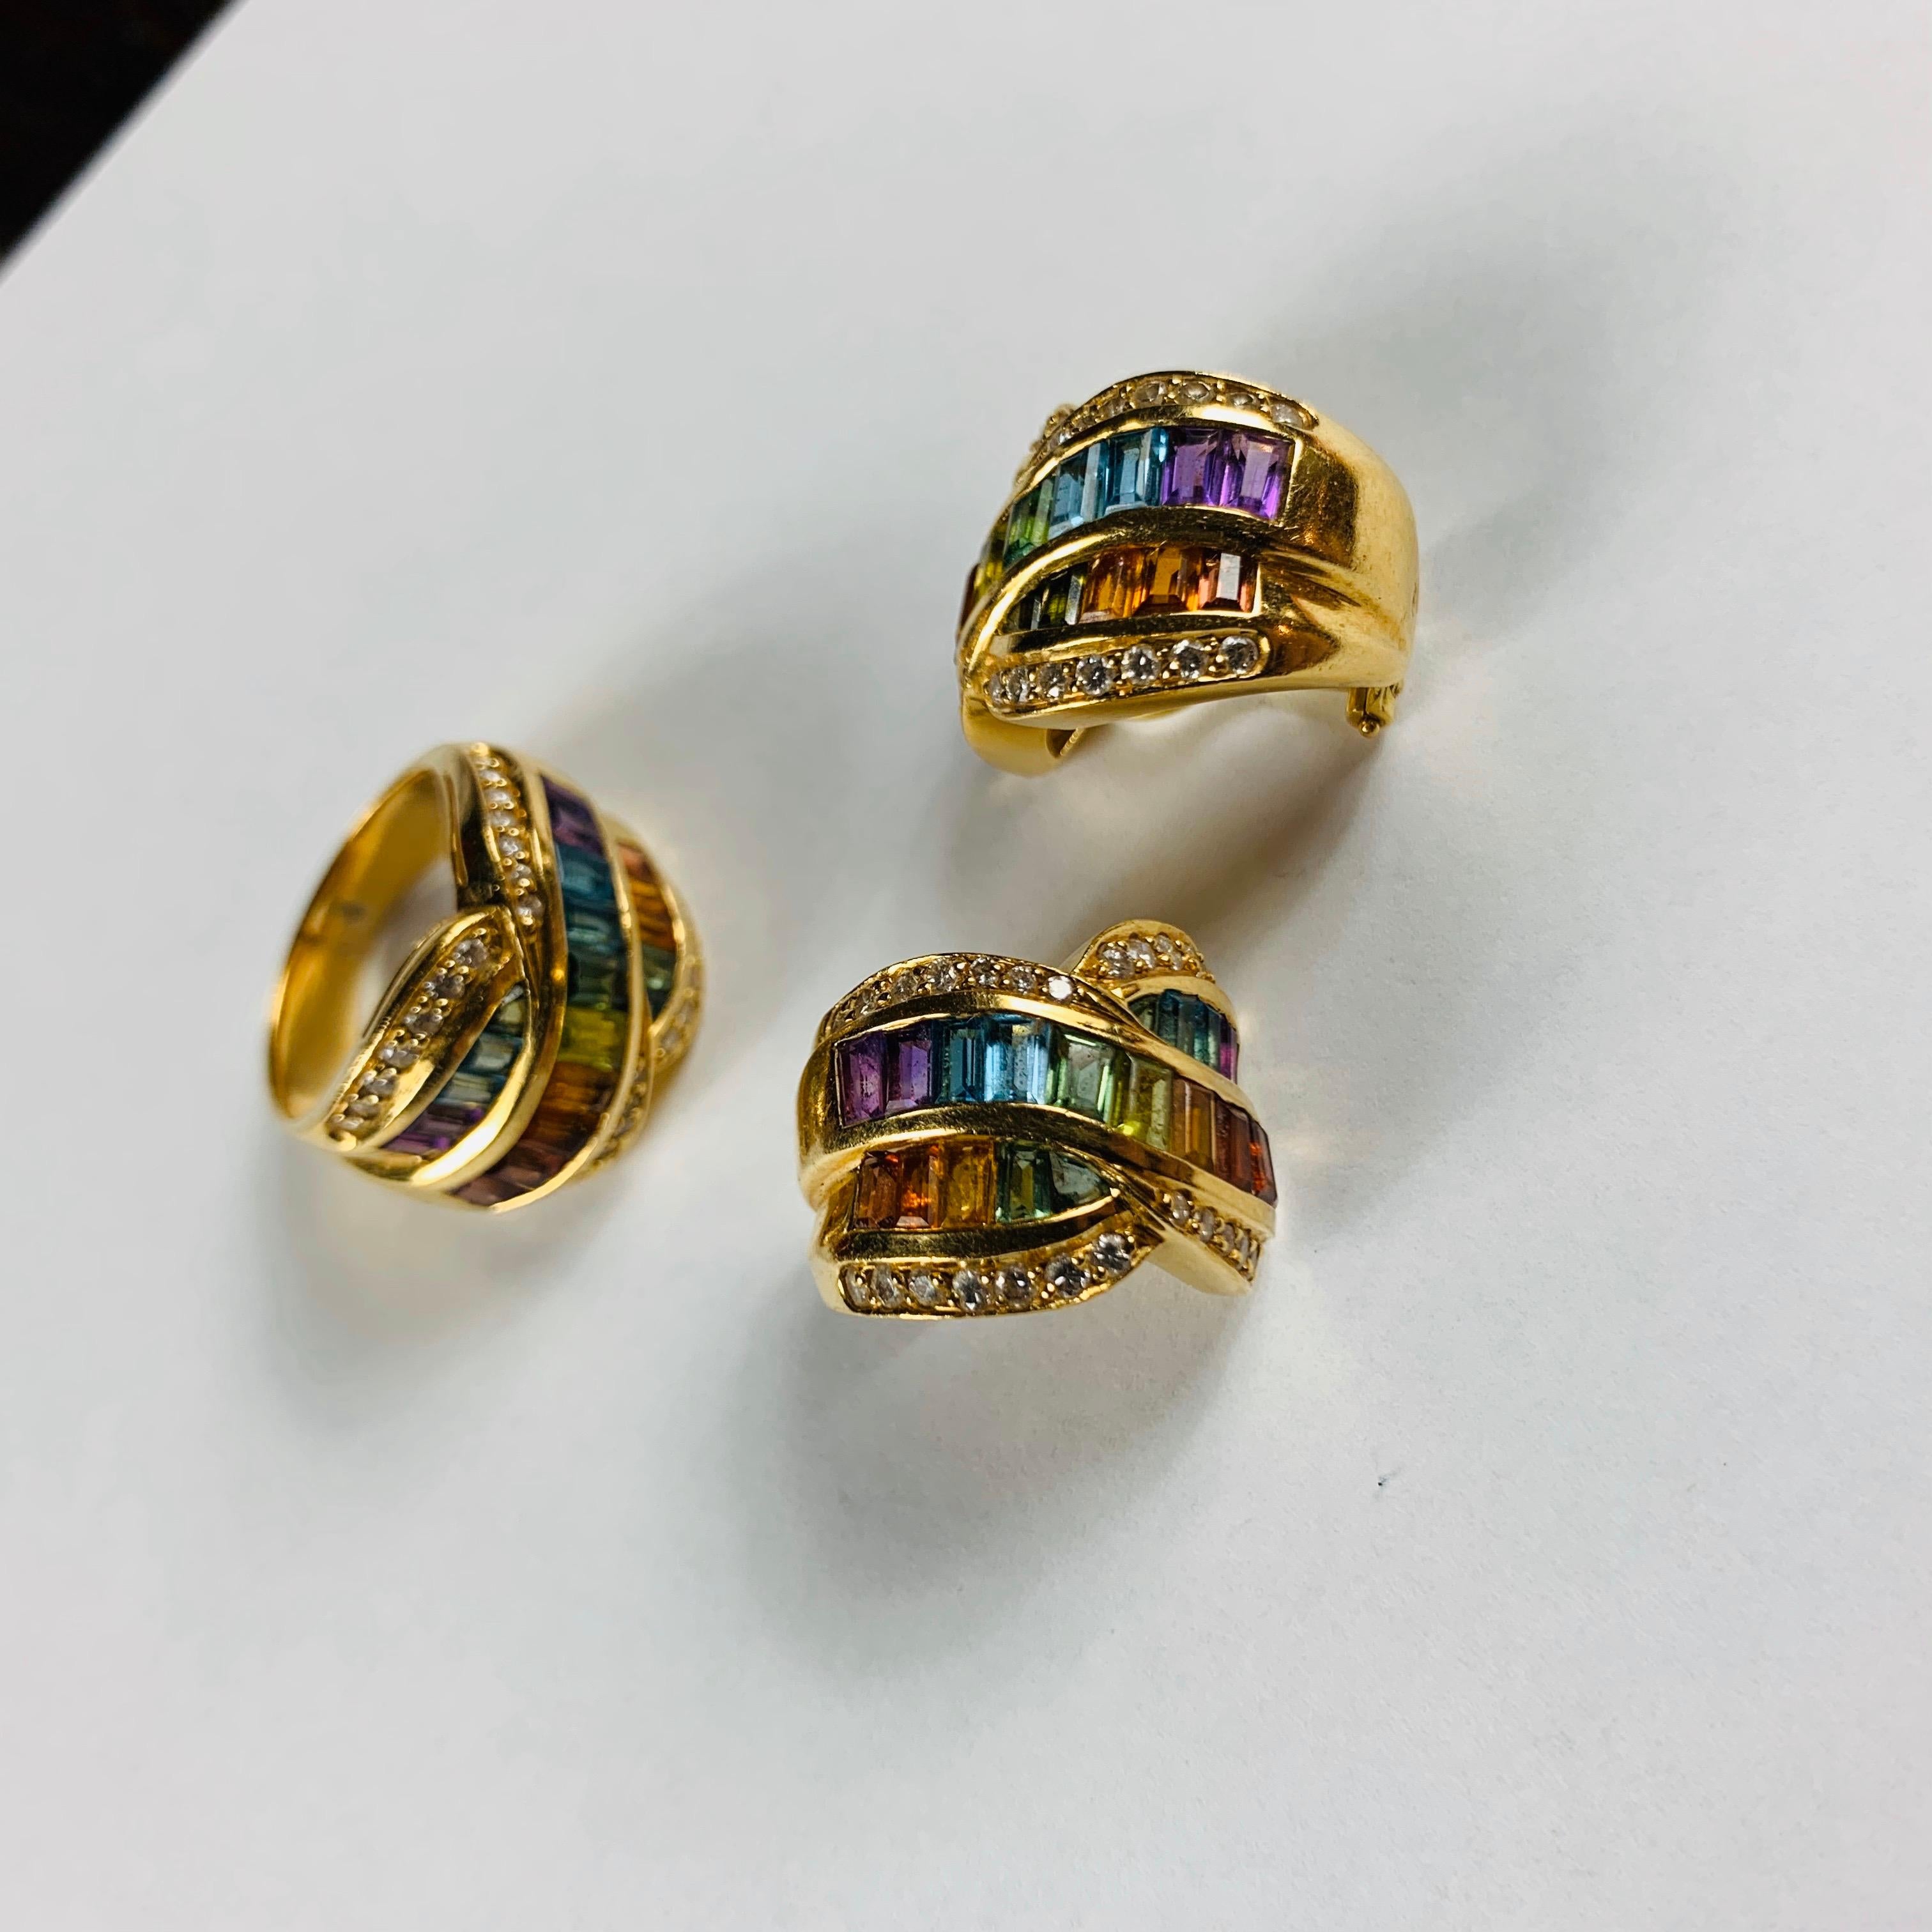 A Beautiful Contemporary Bow Shaped 18 Carrat Earrings And Dome Rings, Consisting of Rainbow Green, Red, Yellow, Pink, Purple And Blue Sapphires With Pave Diamond Edging Detail.